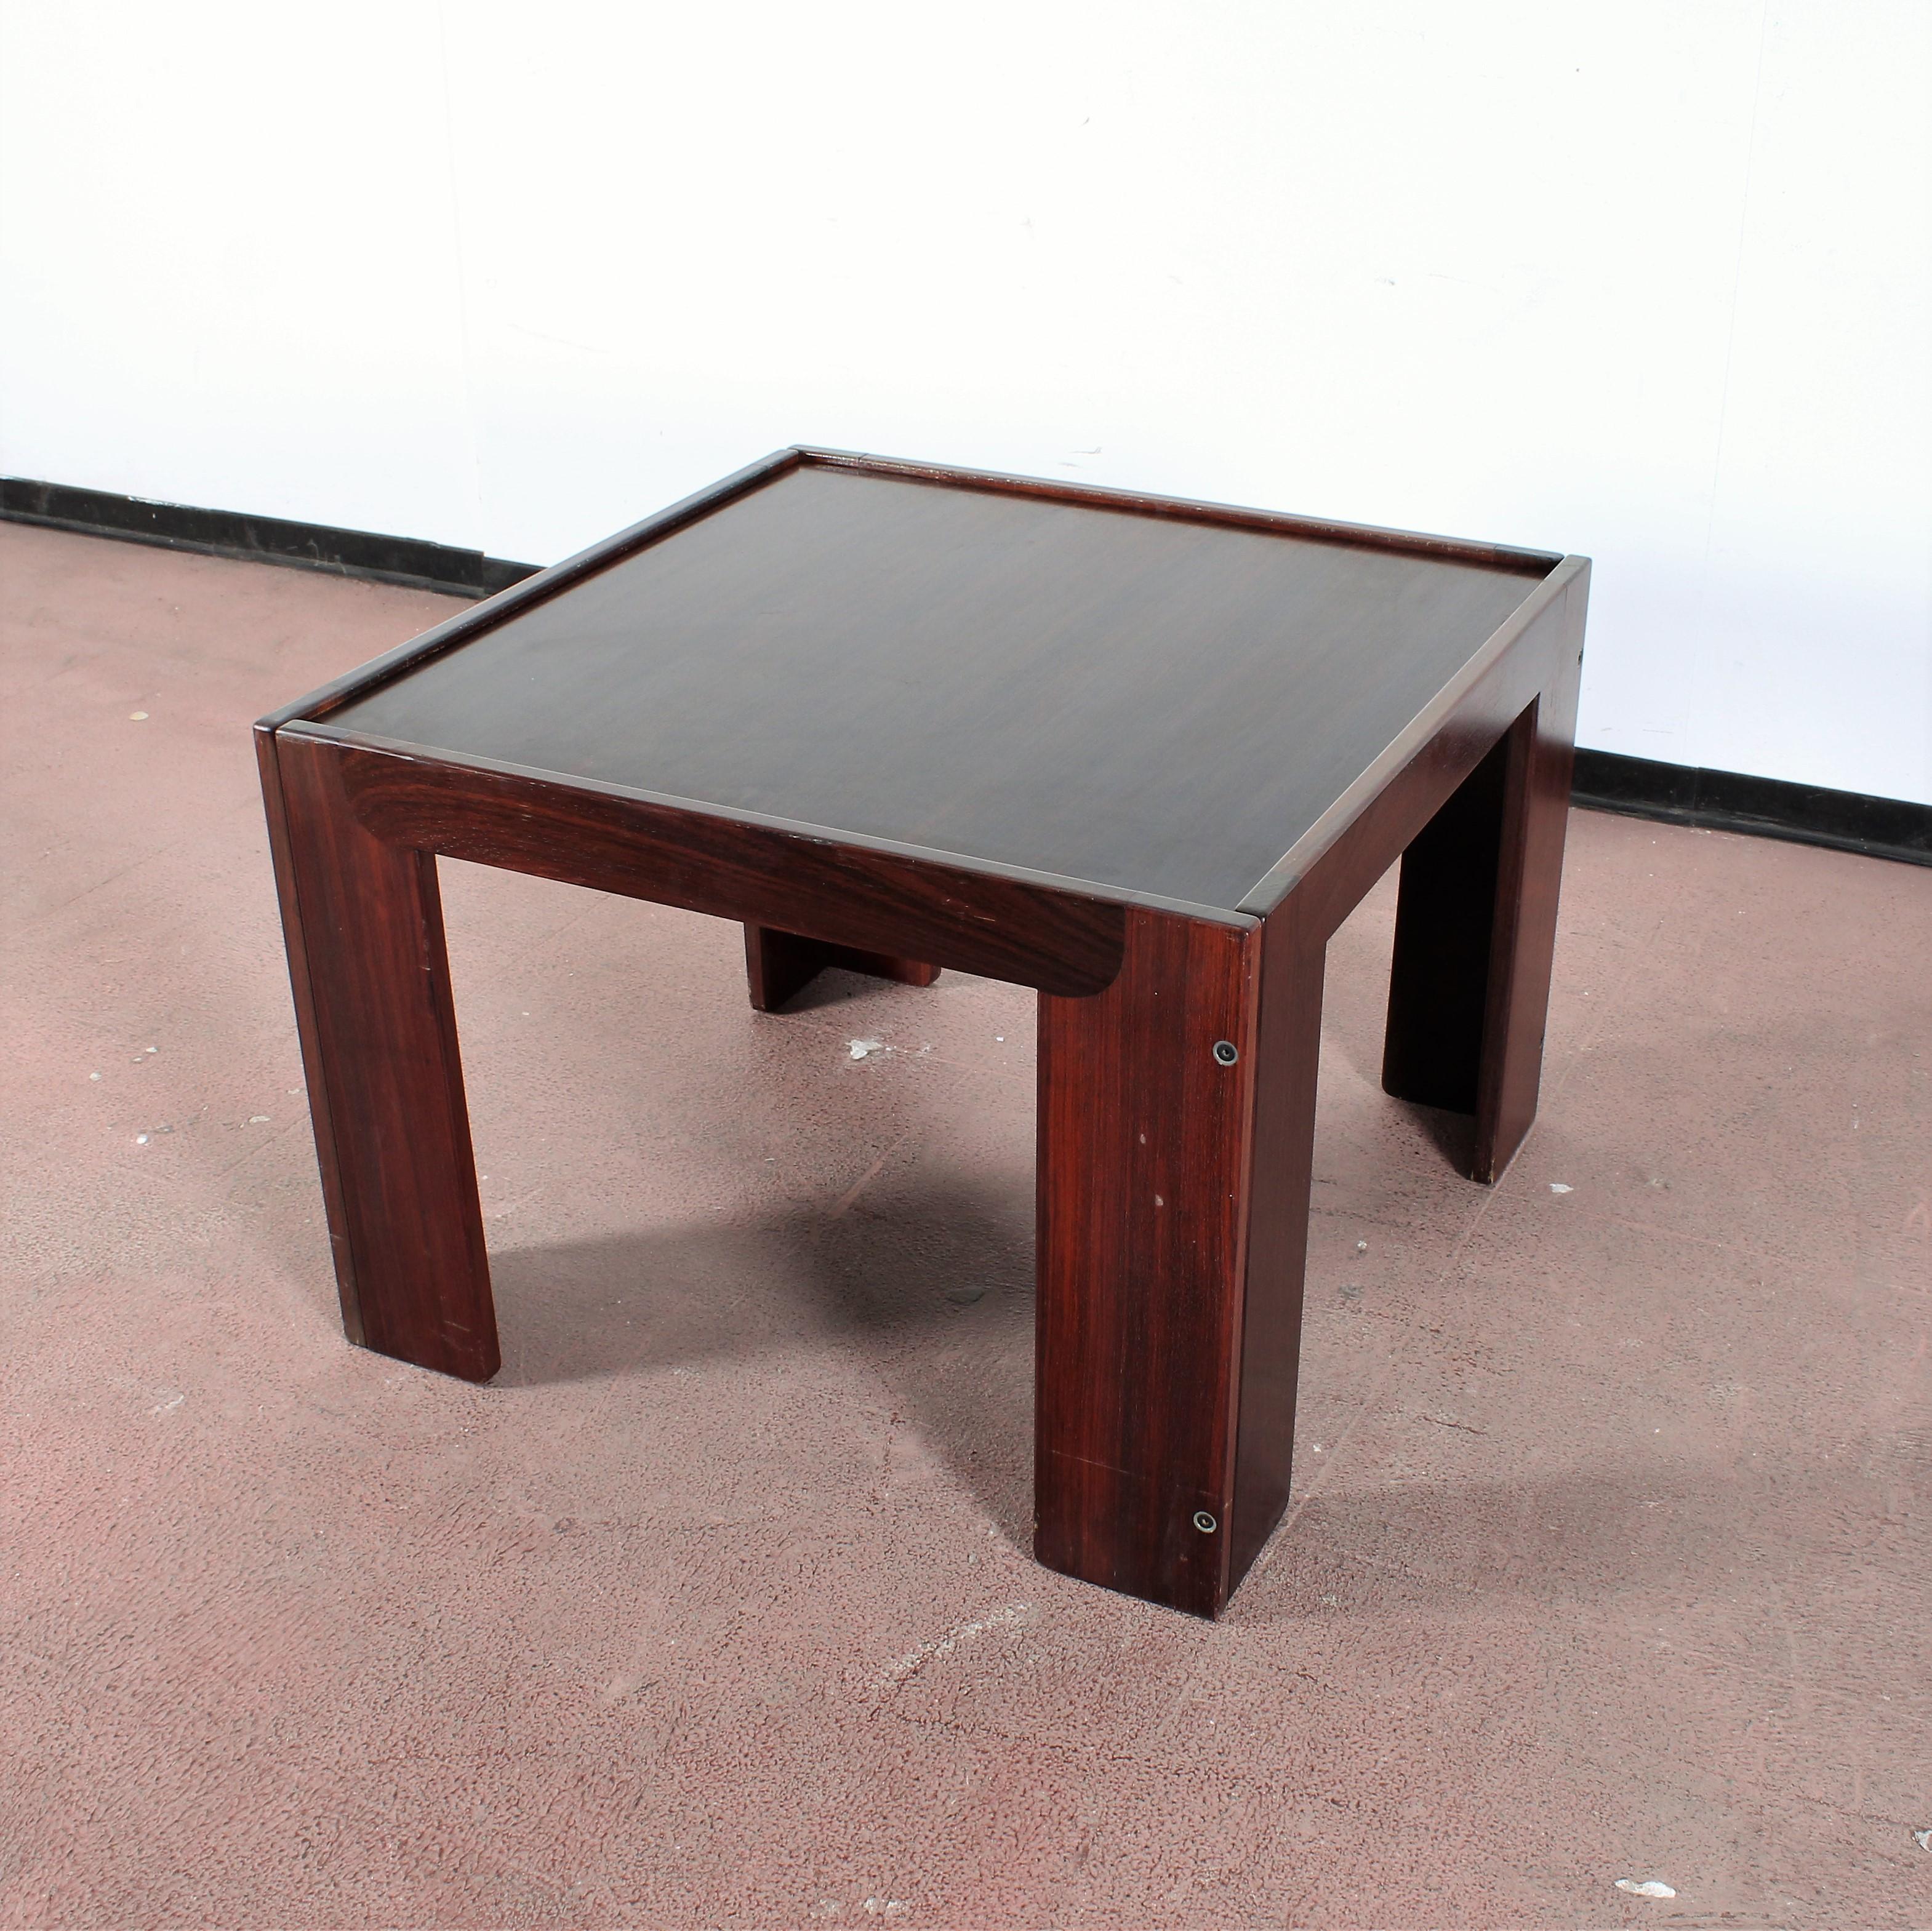 Mid-Century A. & T. Scarpa for Cassina, Meda Wood Coffee Table mod 771 '65 Italy 12